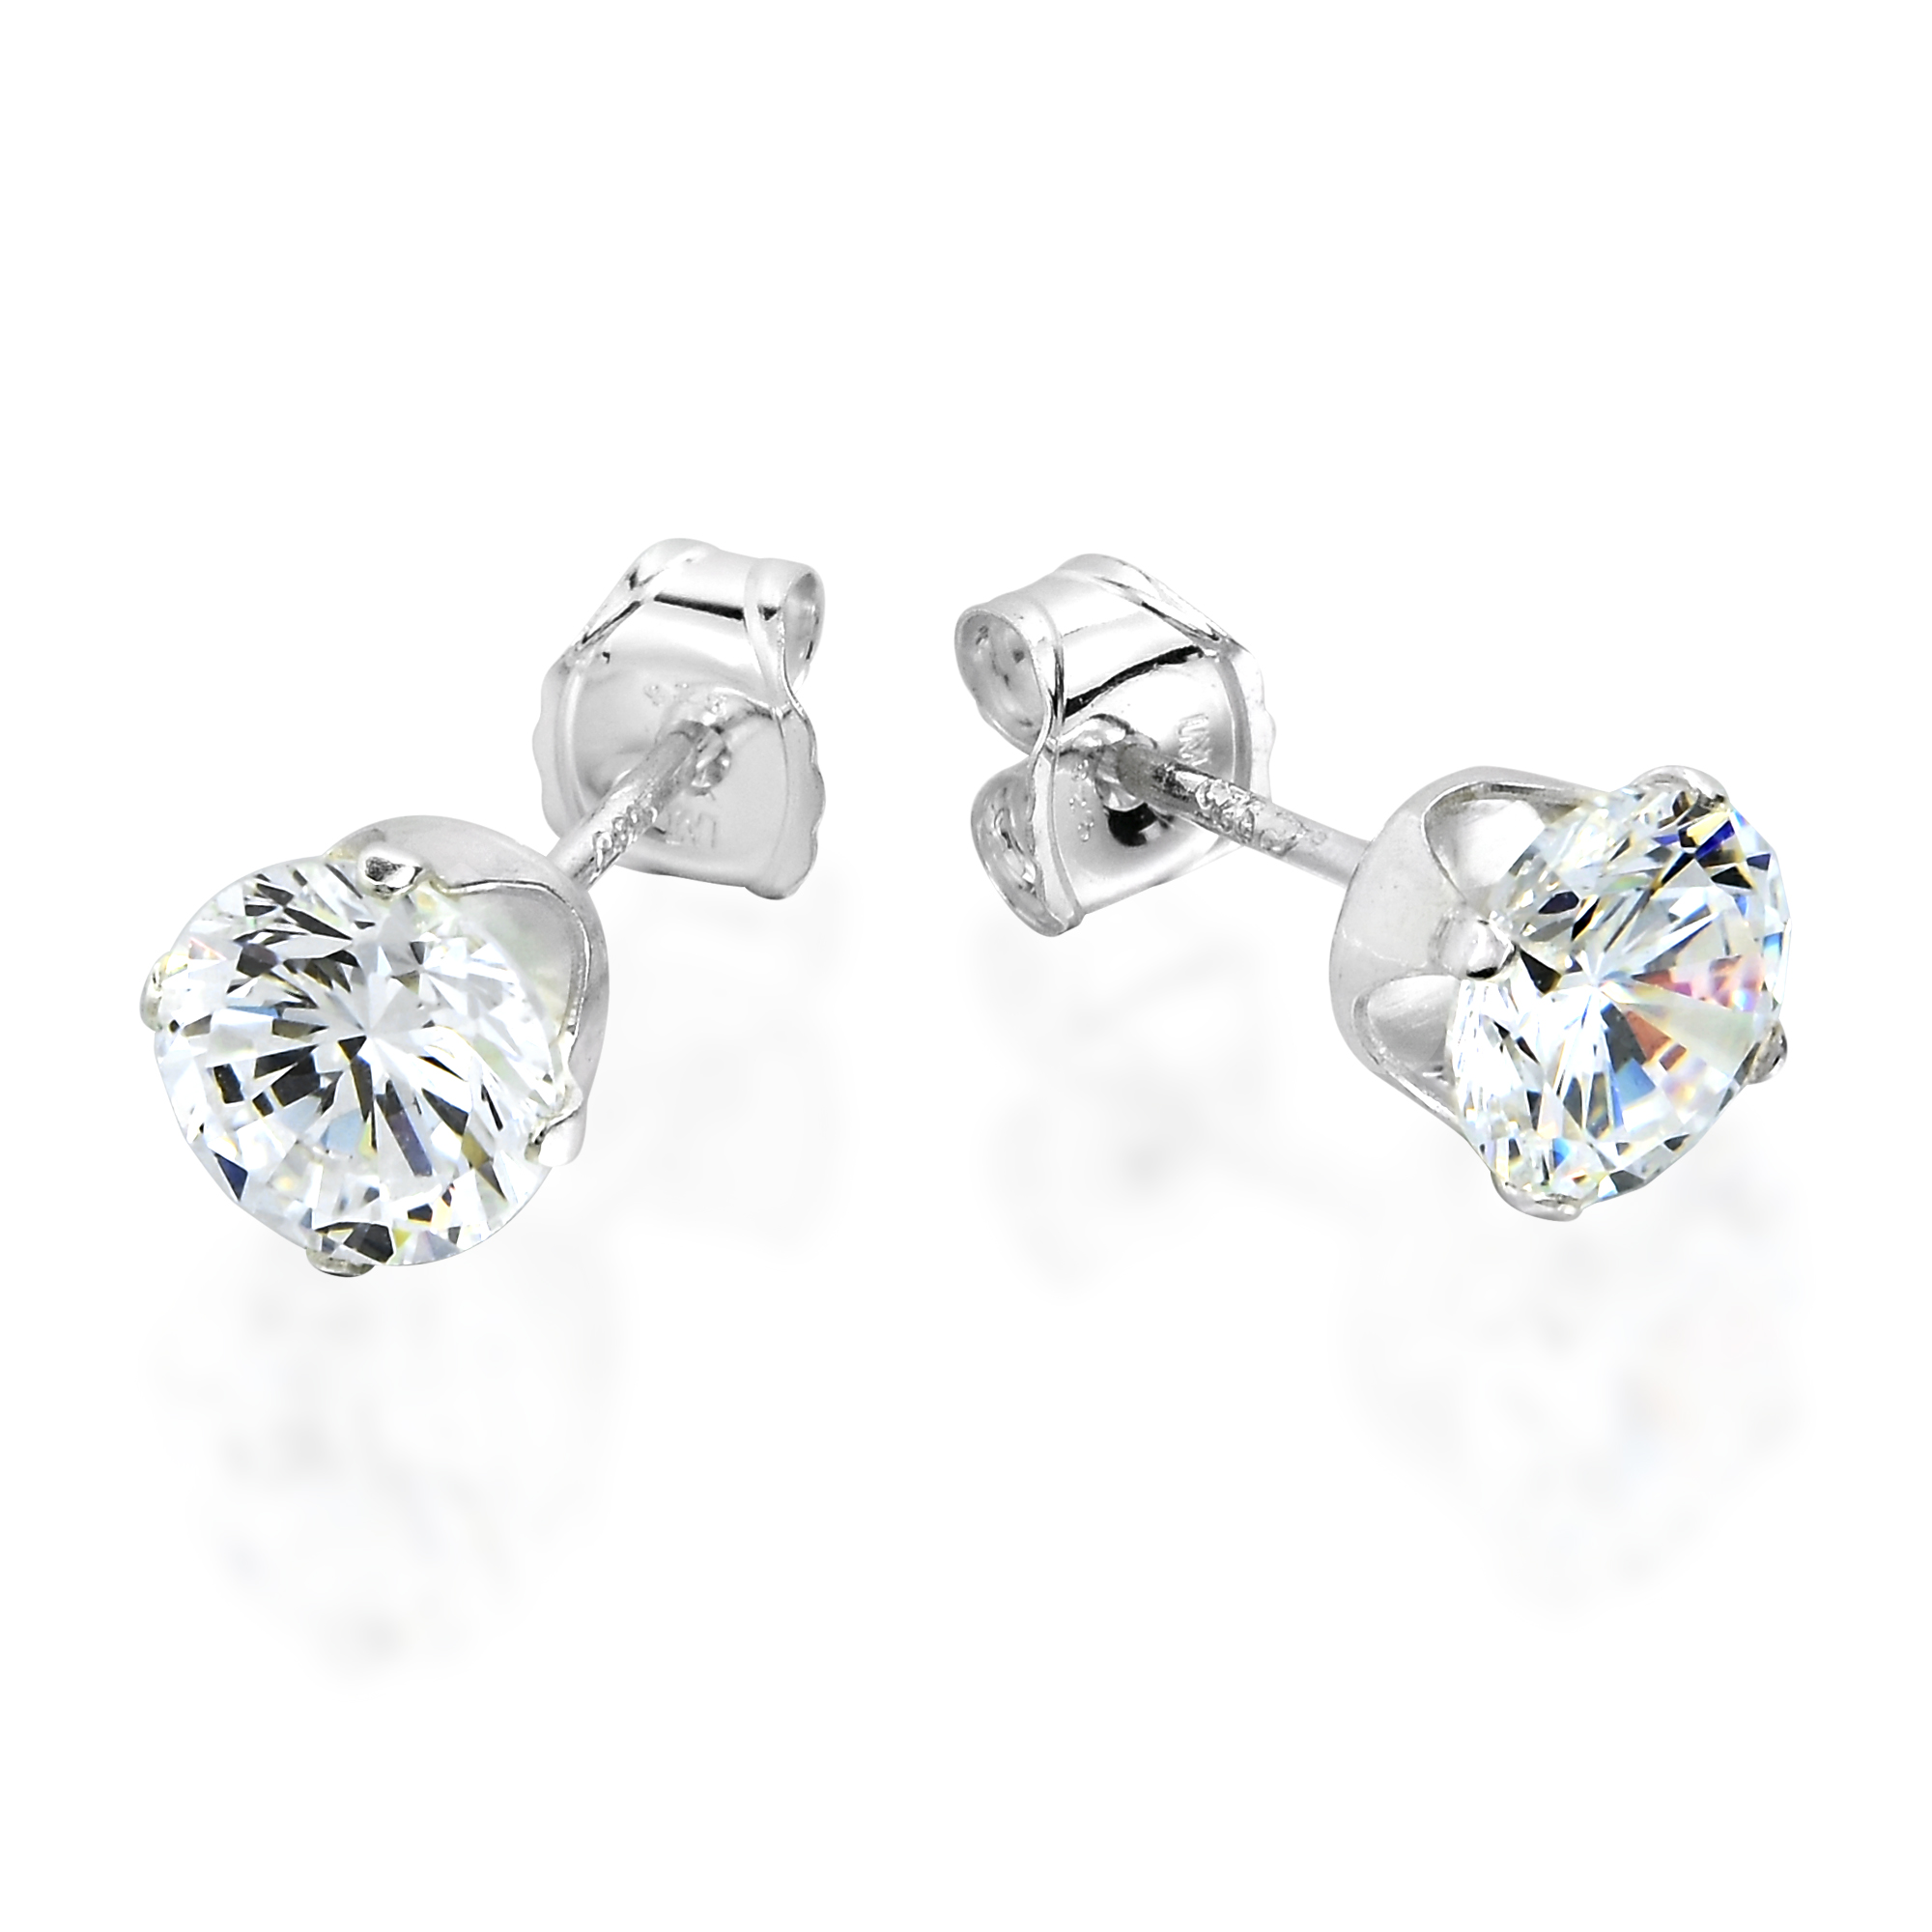 Dazzling 5mm Round White Cubic Zirconia on Sterling Silver Stud